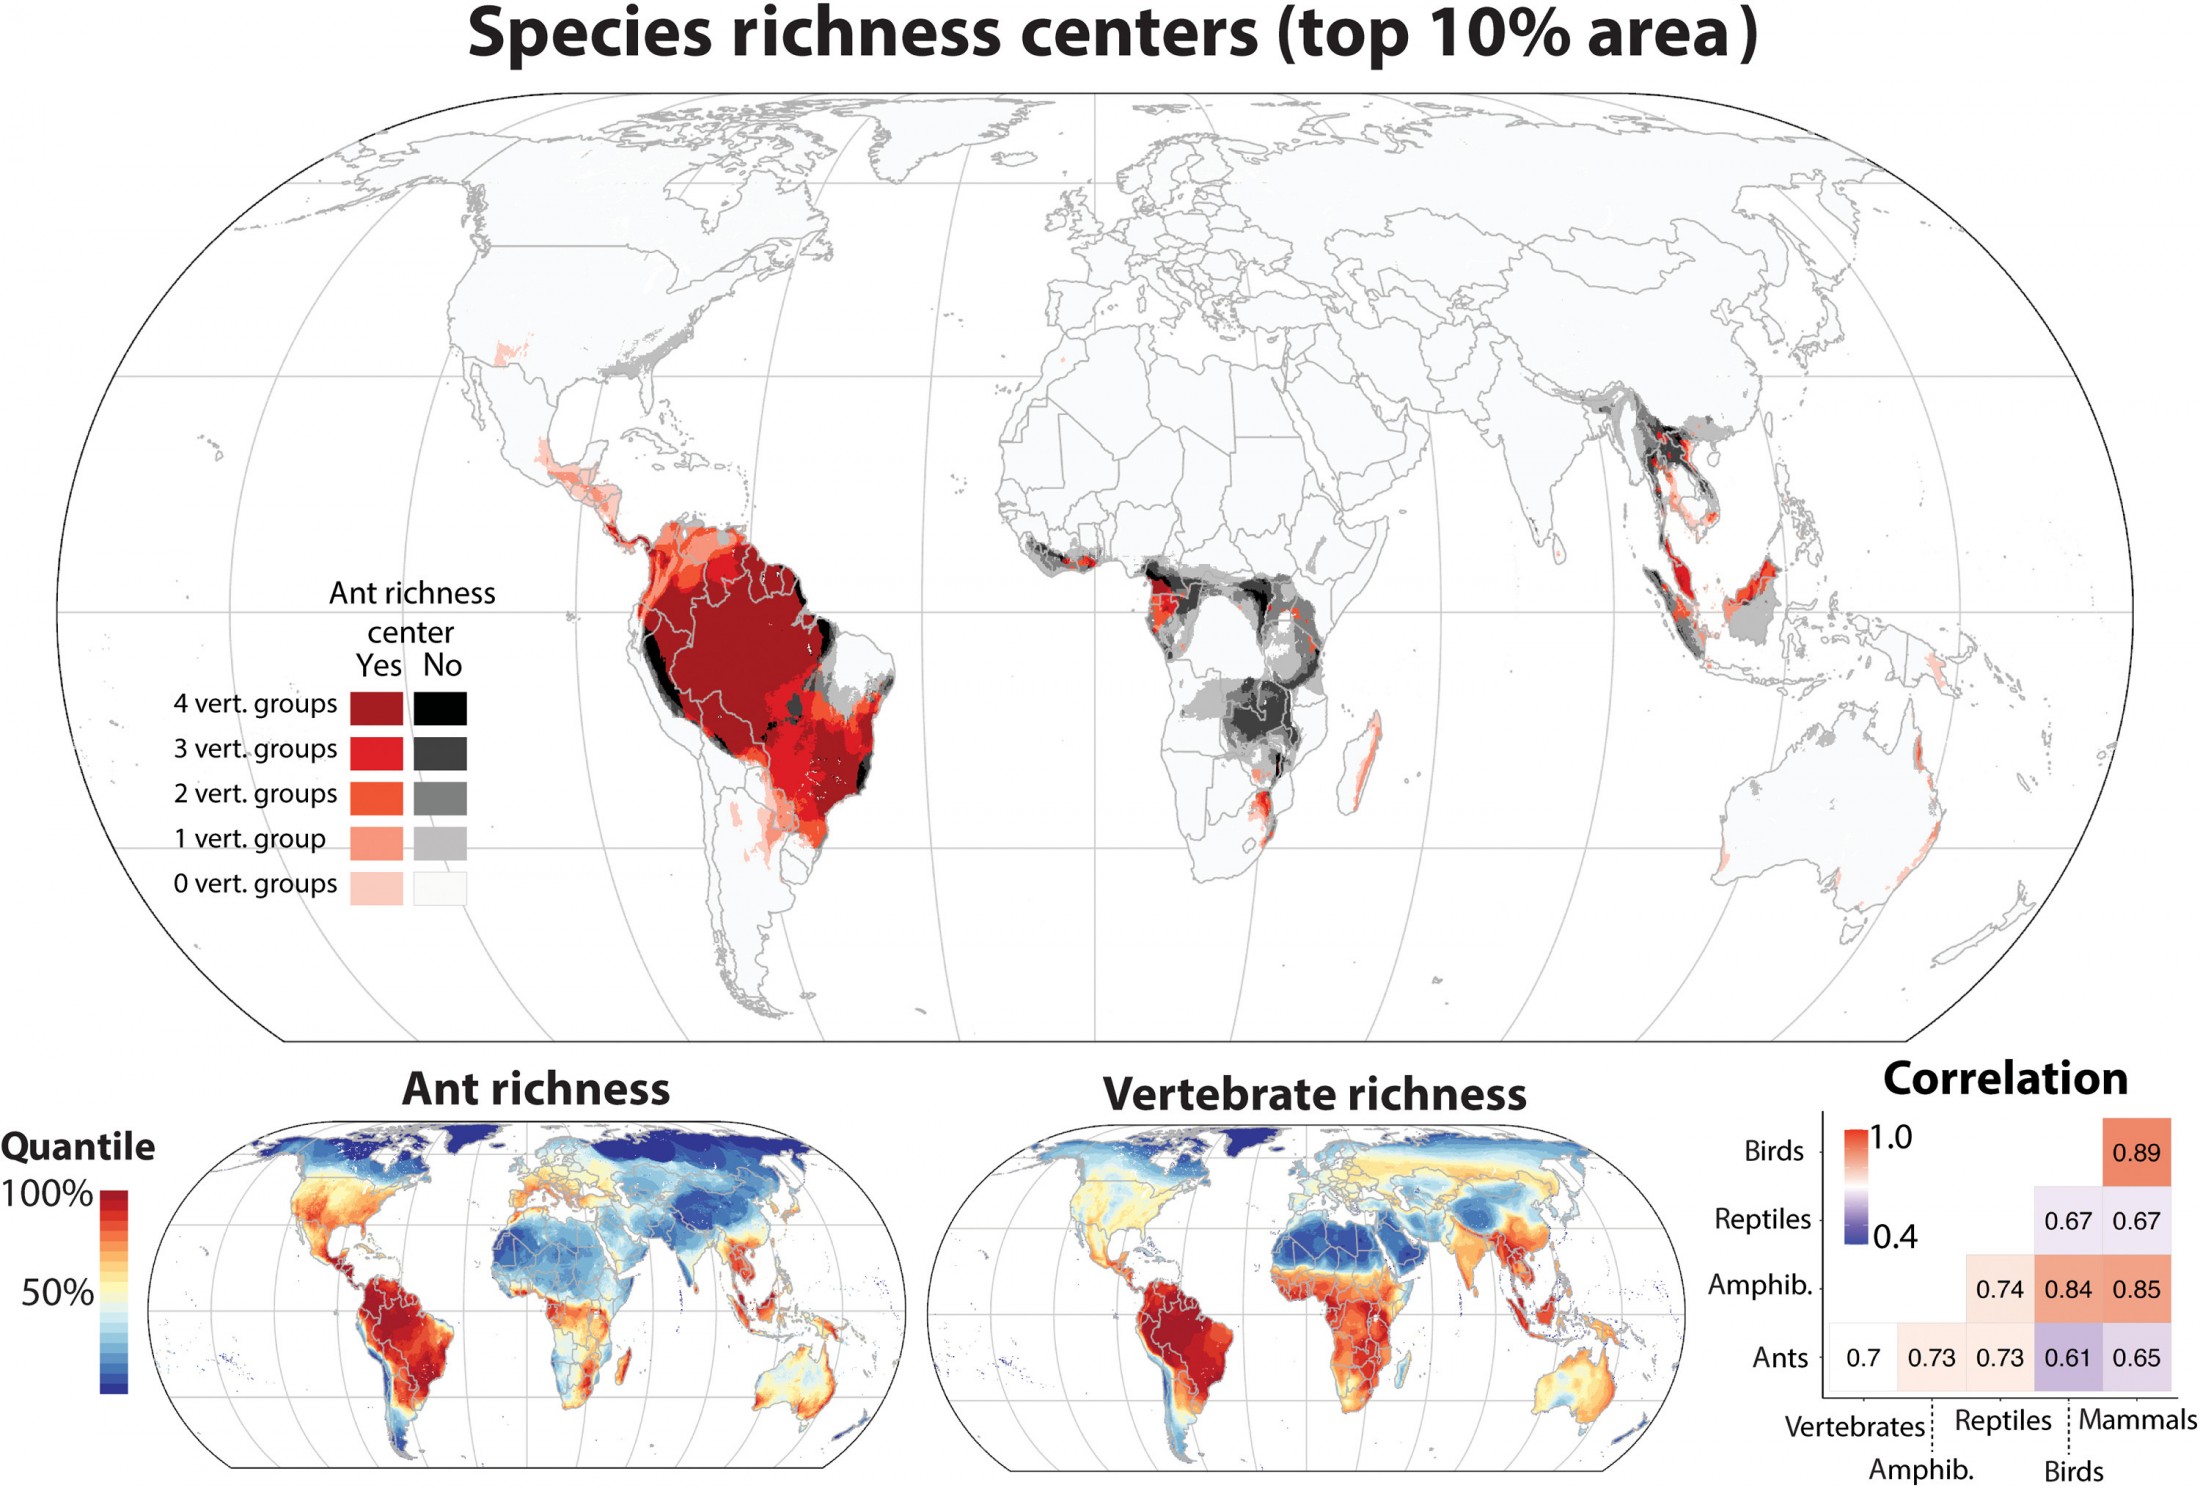 Global map showing ant diversity centers